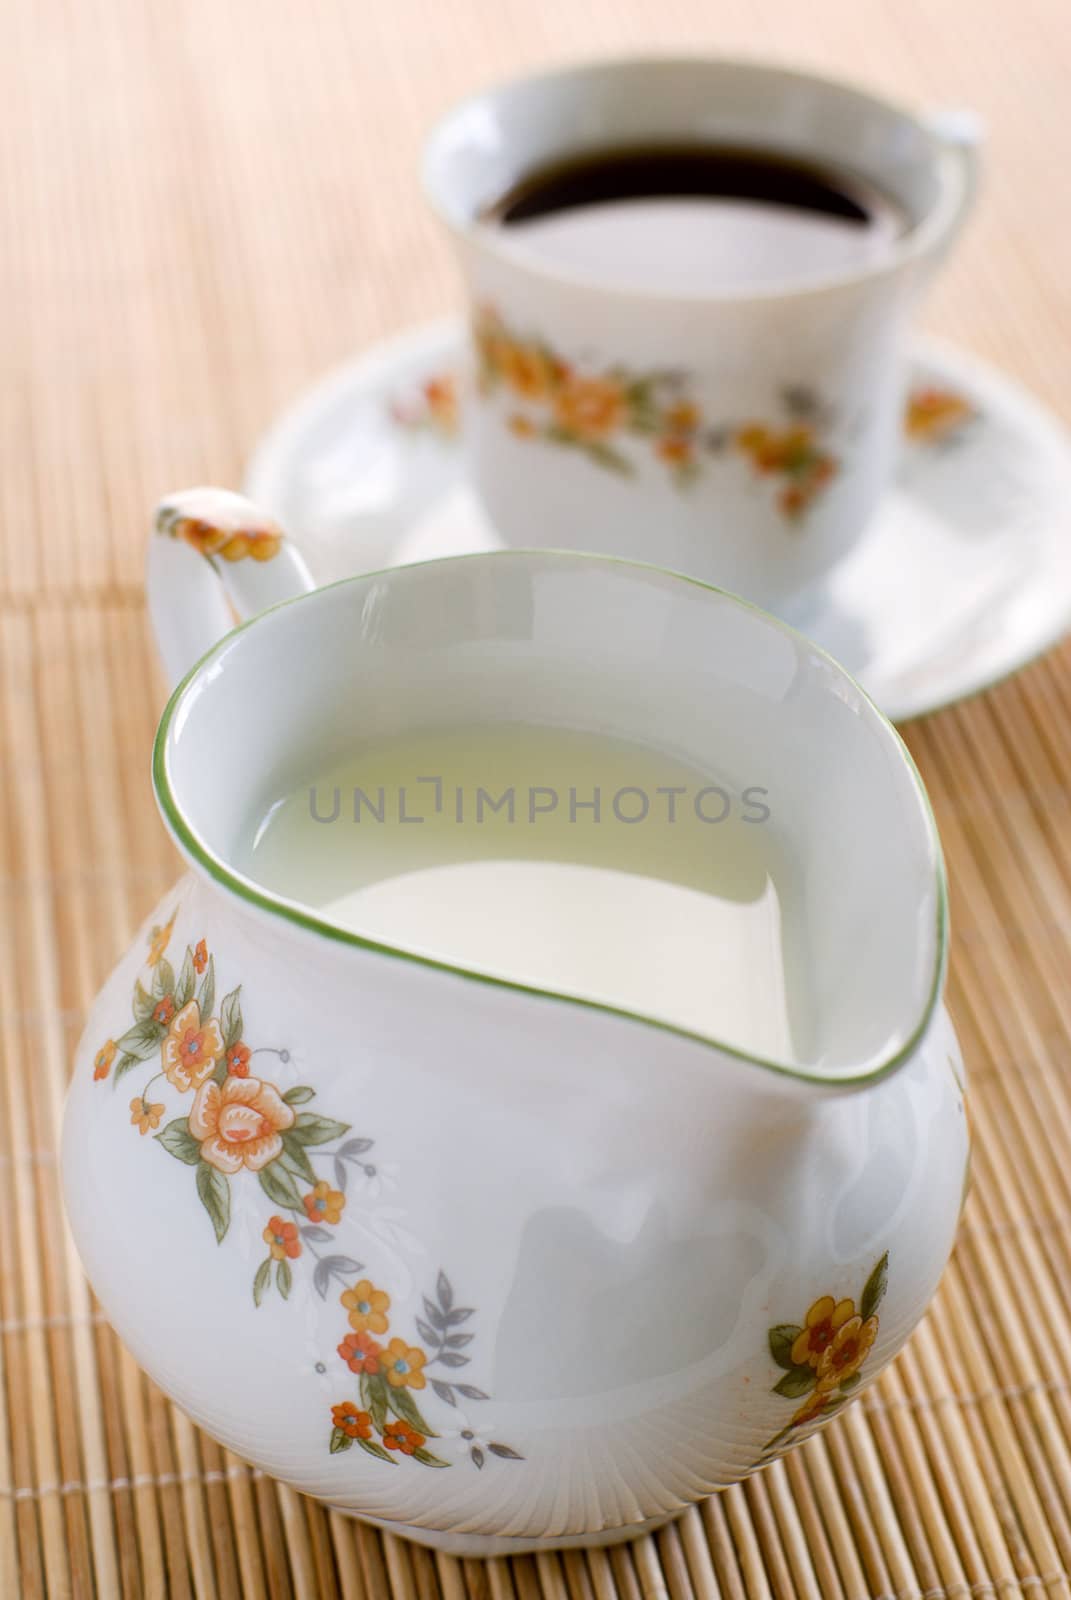 Milk in floral pattern porcelain milk jug on the wooden mat - on the front and cup of coffee behind. Shallow DOF.